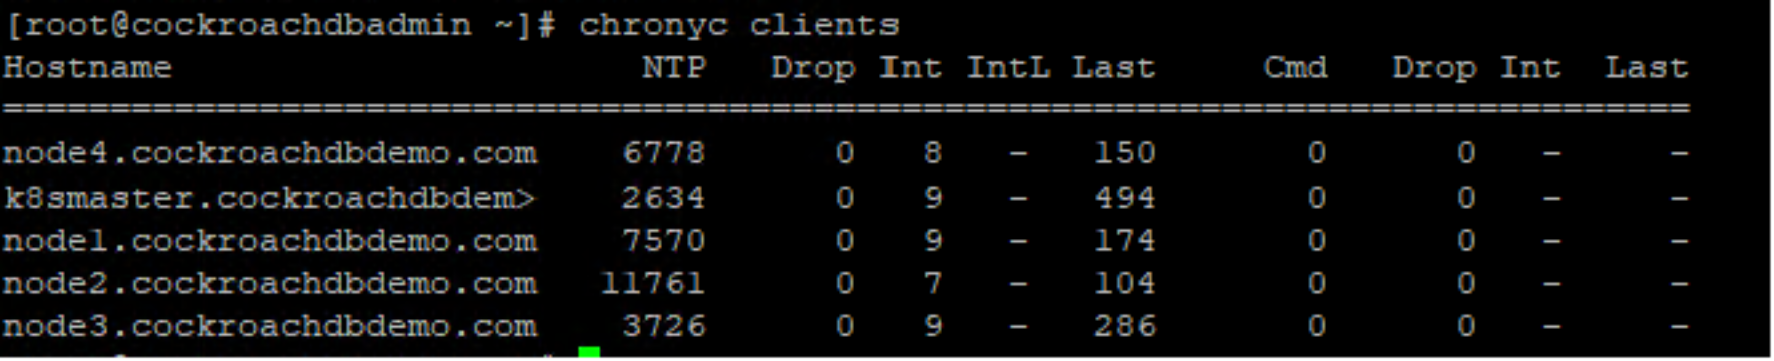 This figure shows a sample list of chronyc clients.